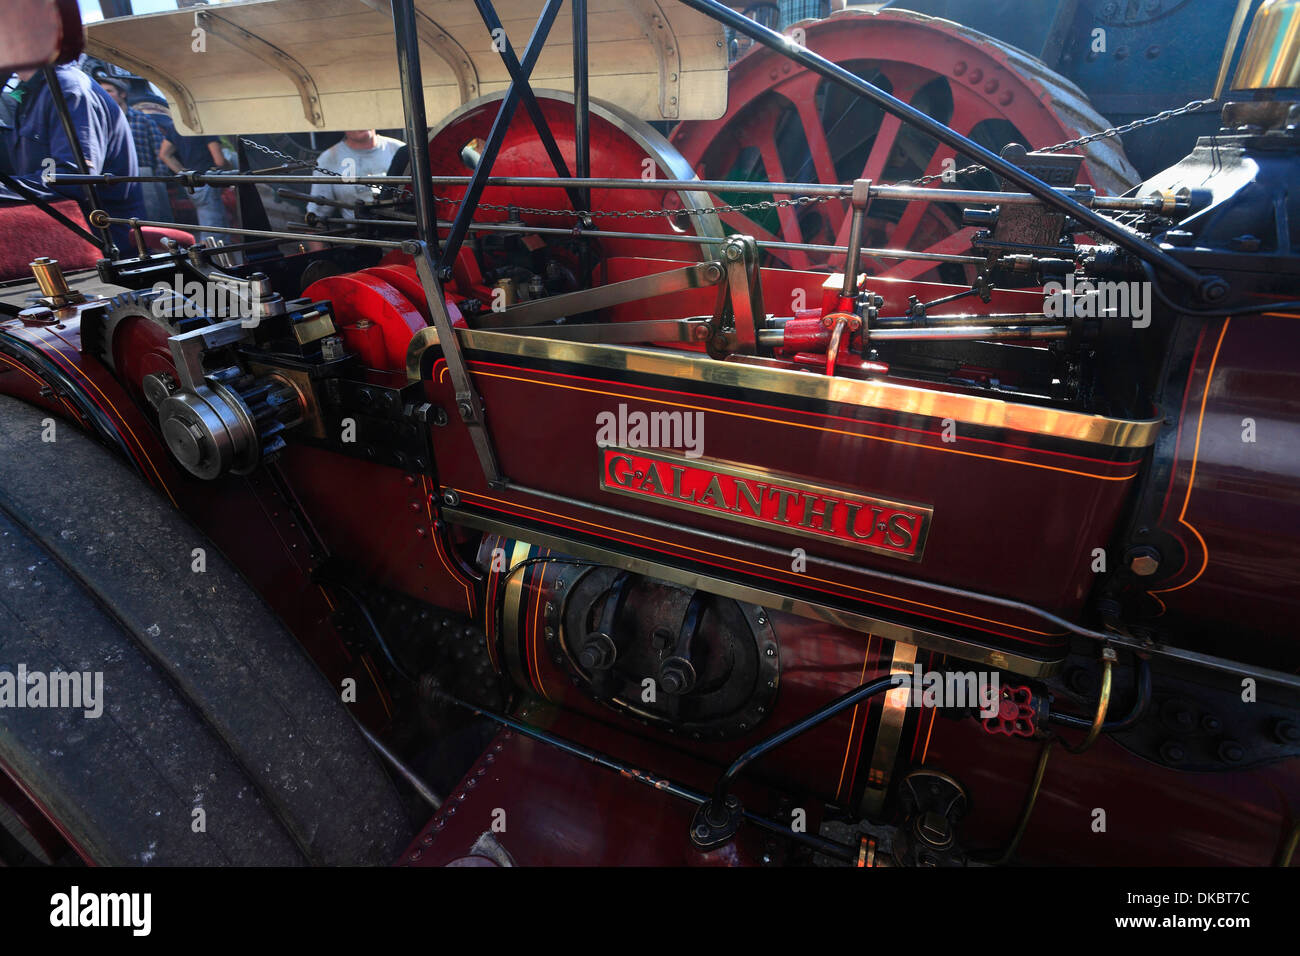 Machinery and moving parts on traction engine 'Galanthus' at a steam rally in Heacham, Norfolk, UK. Stock Photo